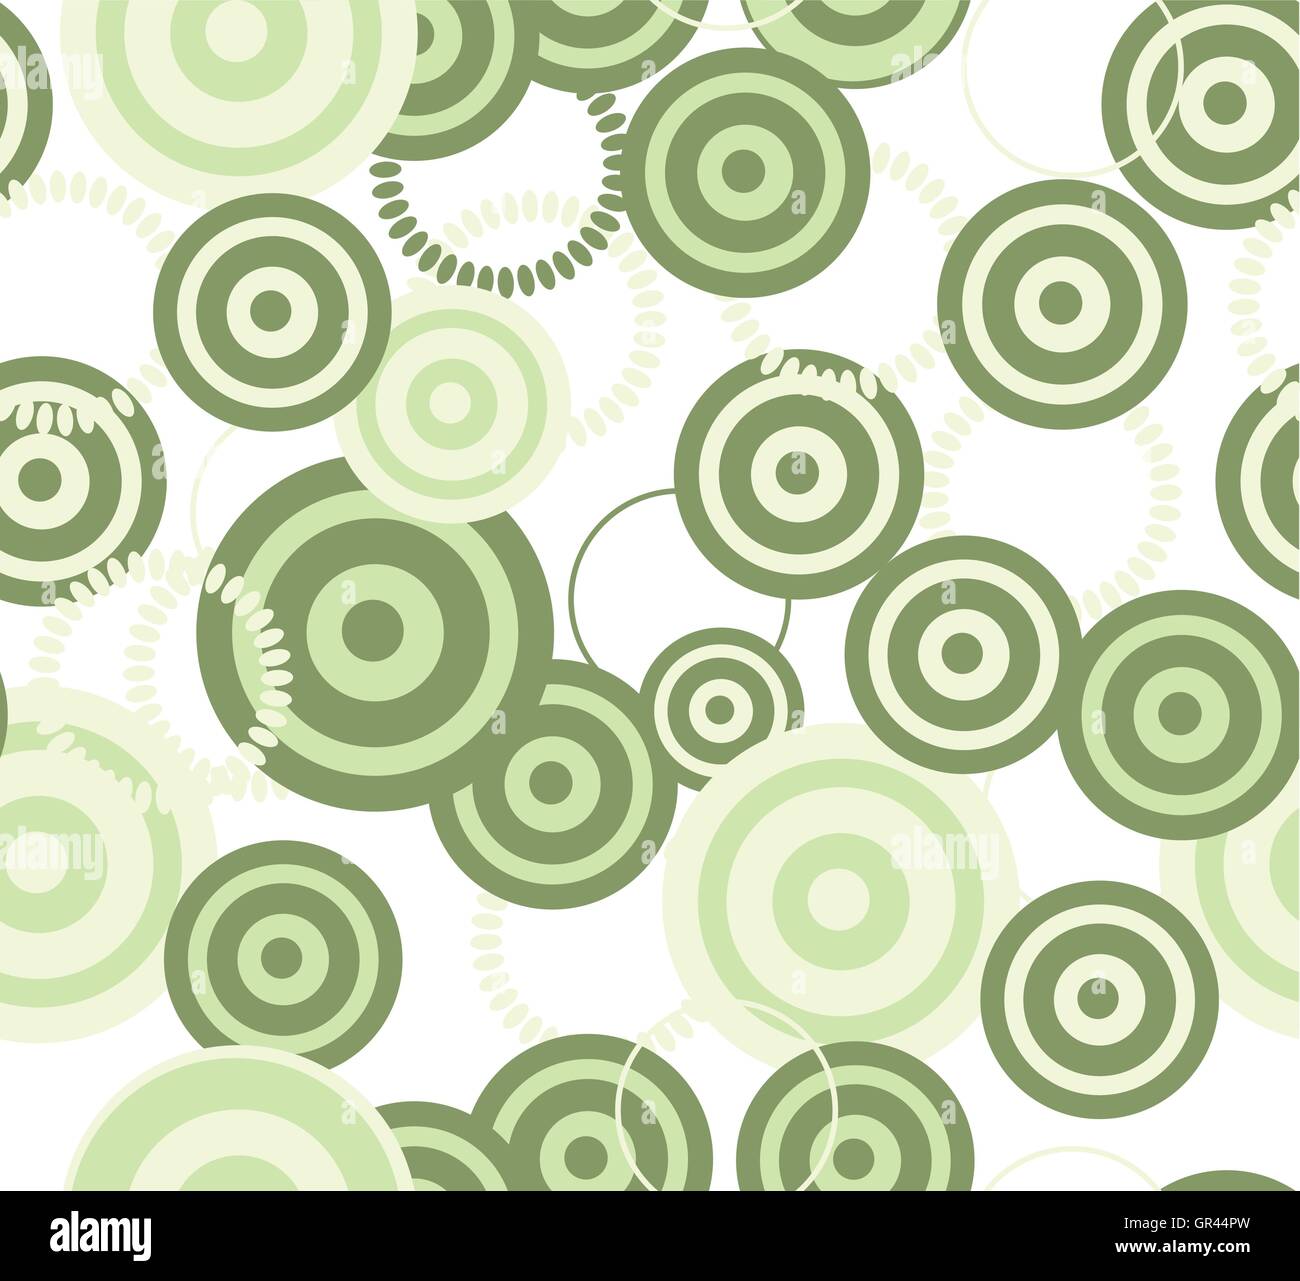 Vector Illustration Of Abstract 70s 80s 90s Background Stock